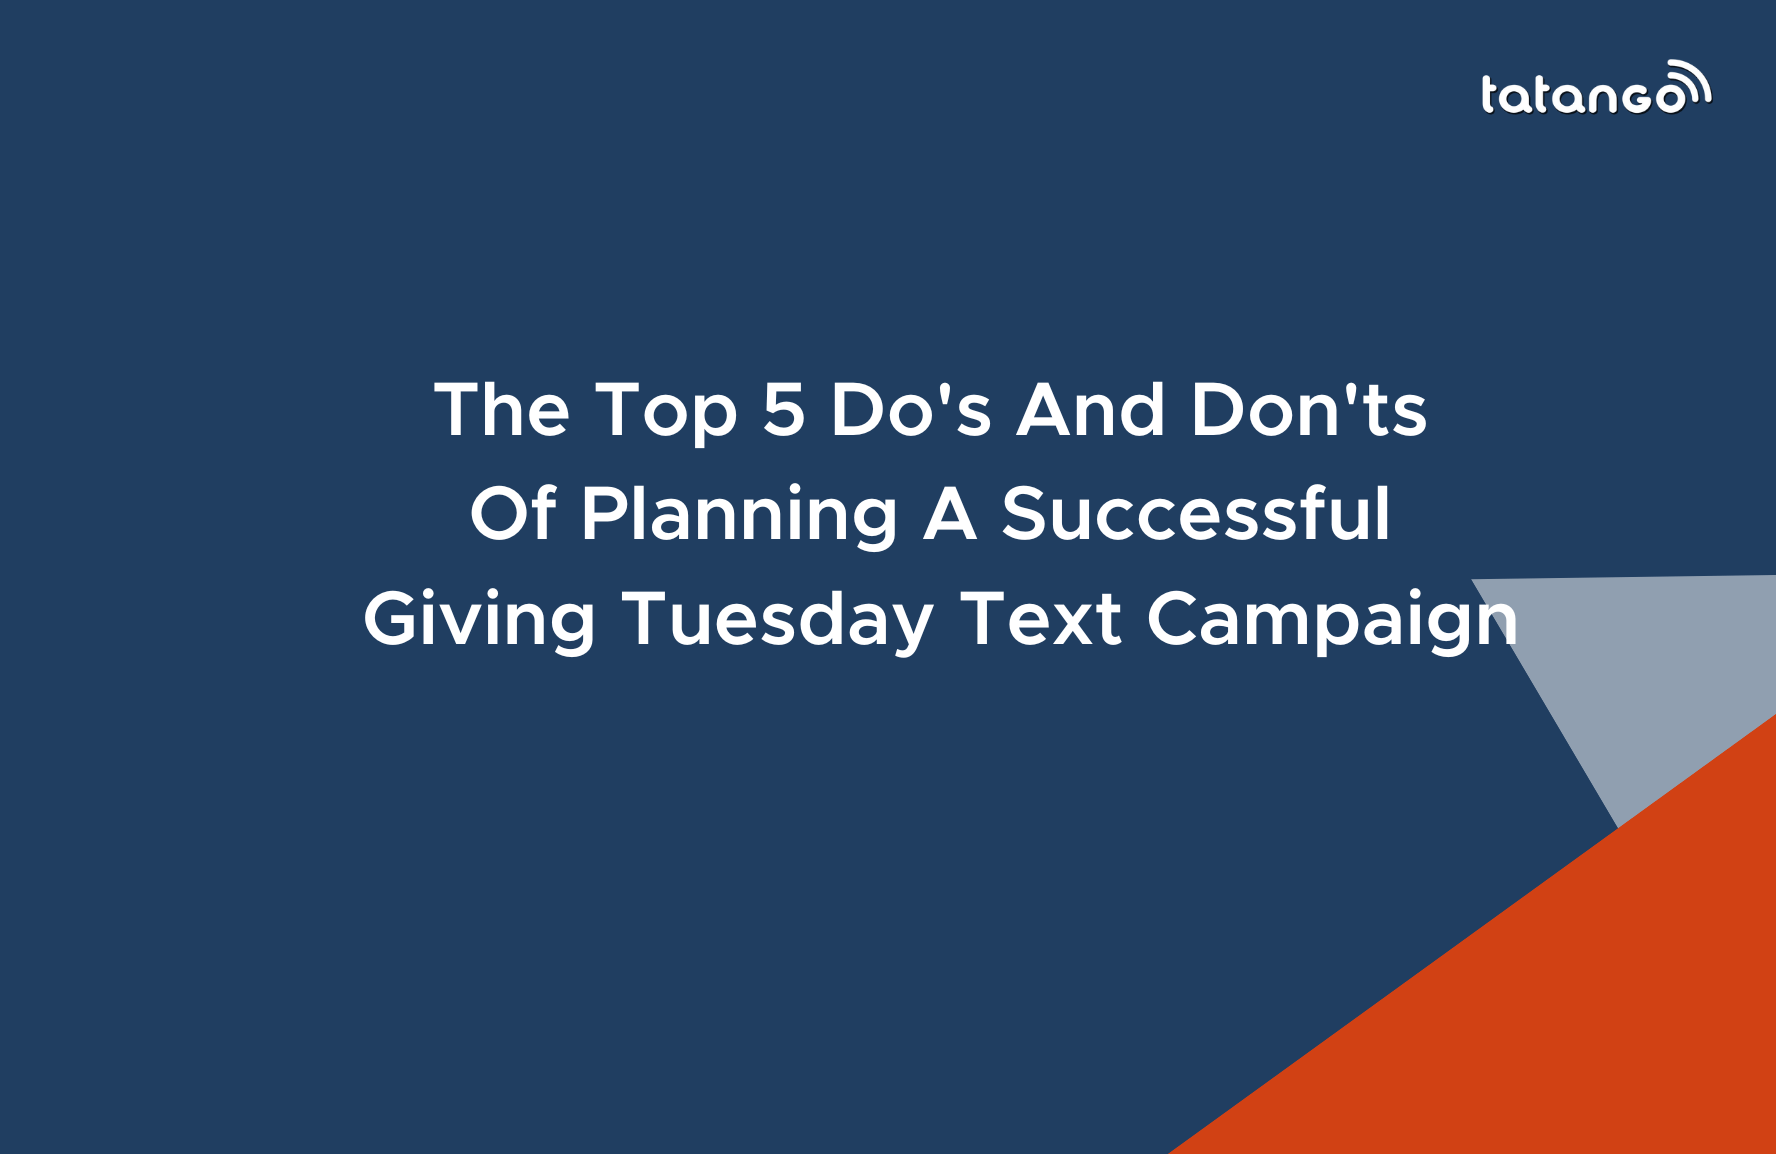 Five Do's and Don’ts of Planning a Successful Giving Tuesday SMS Campaign